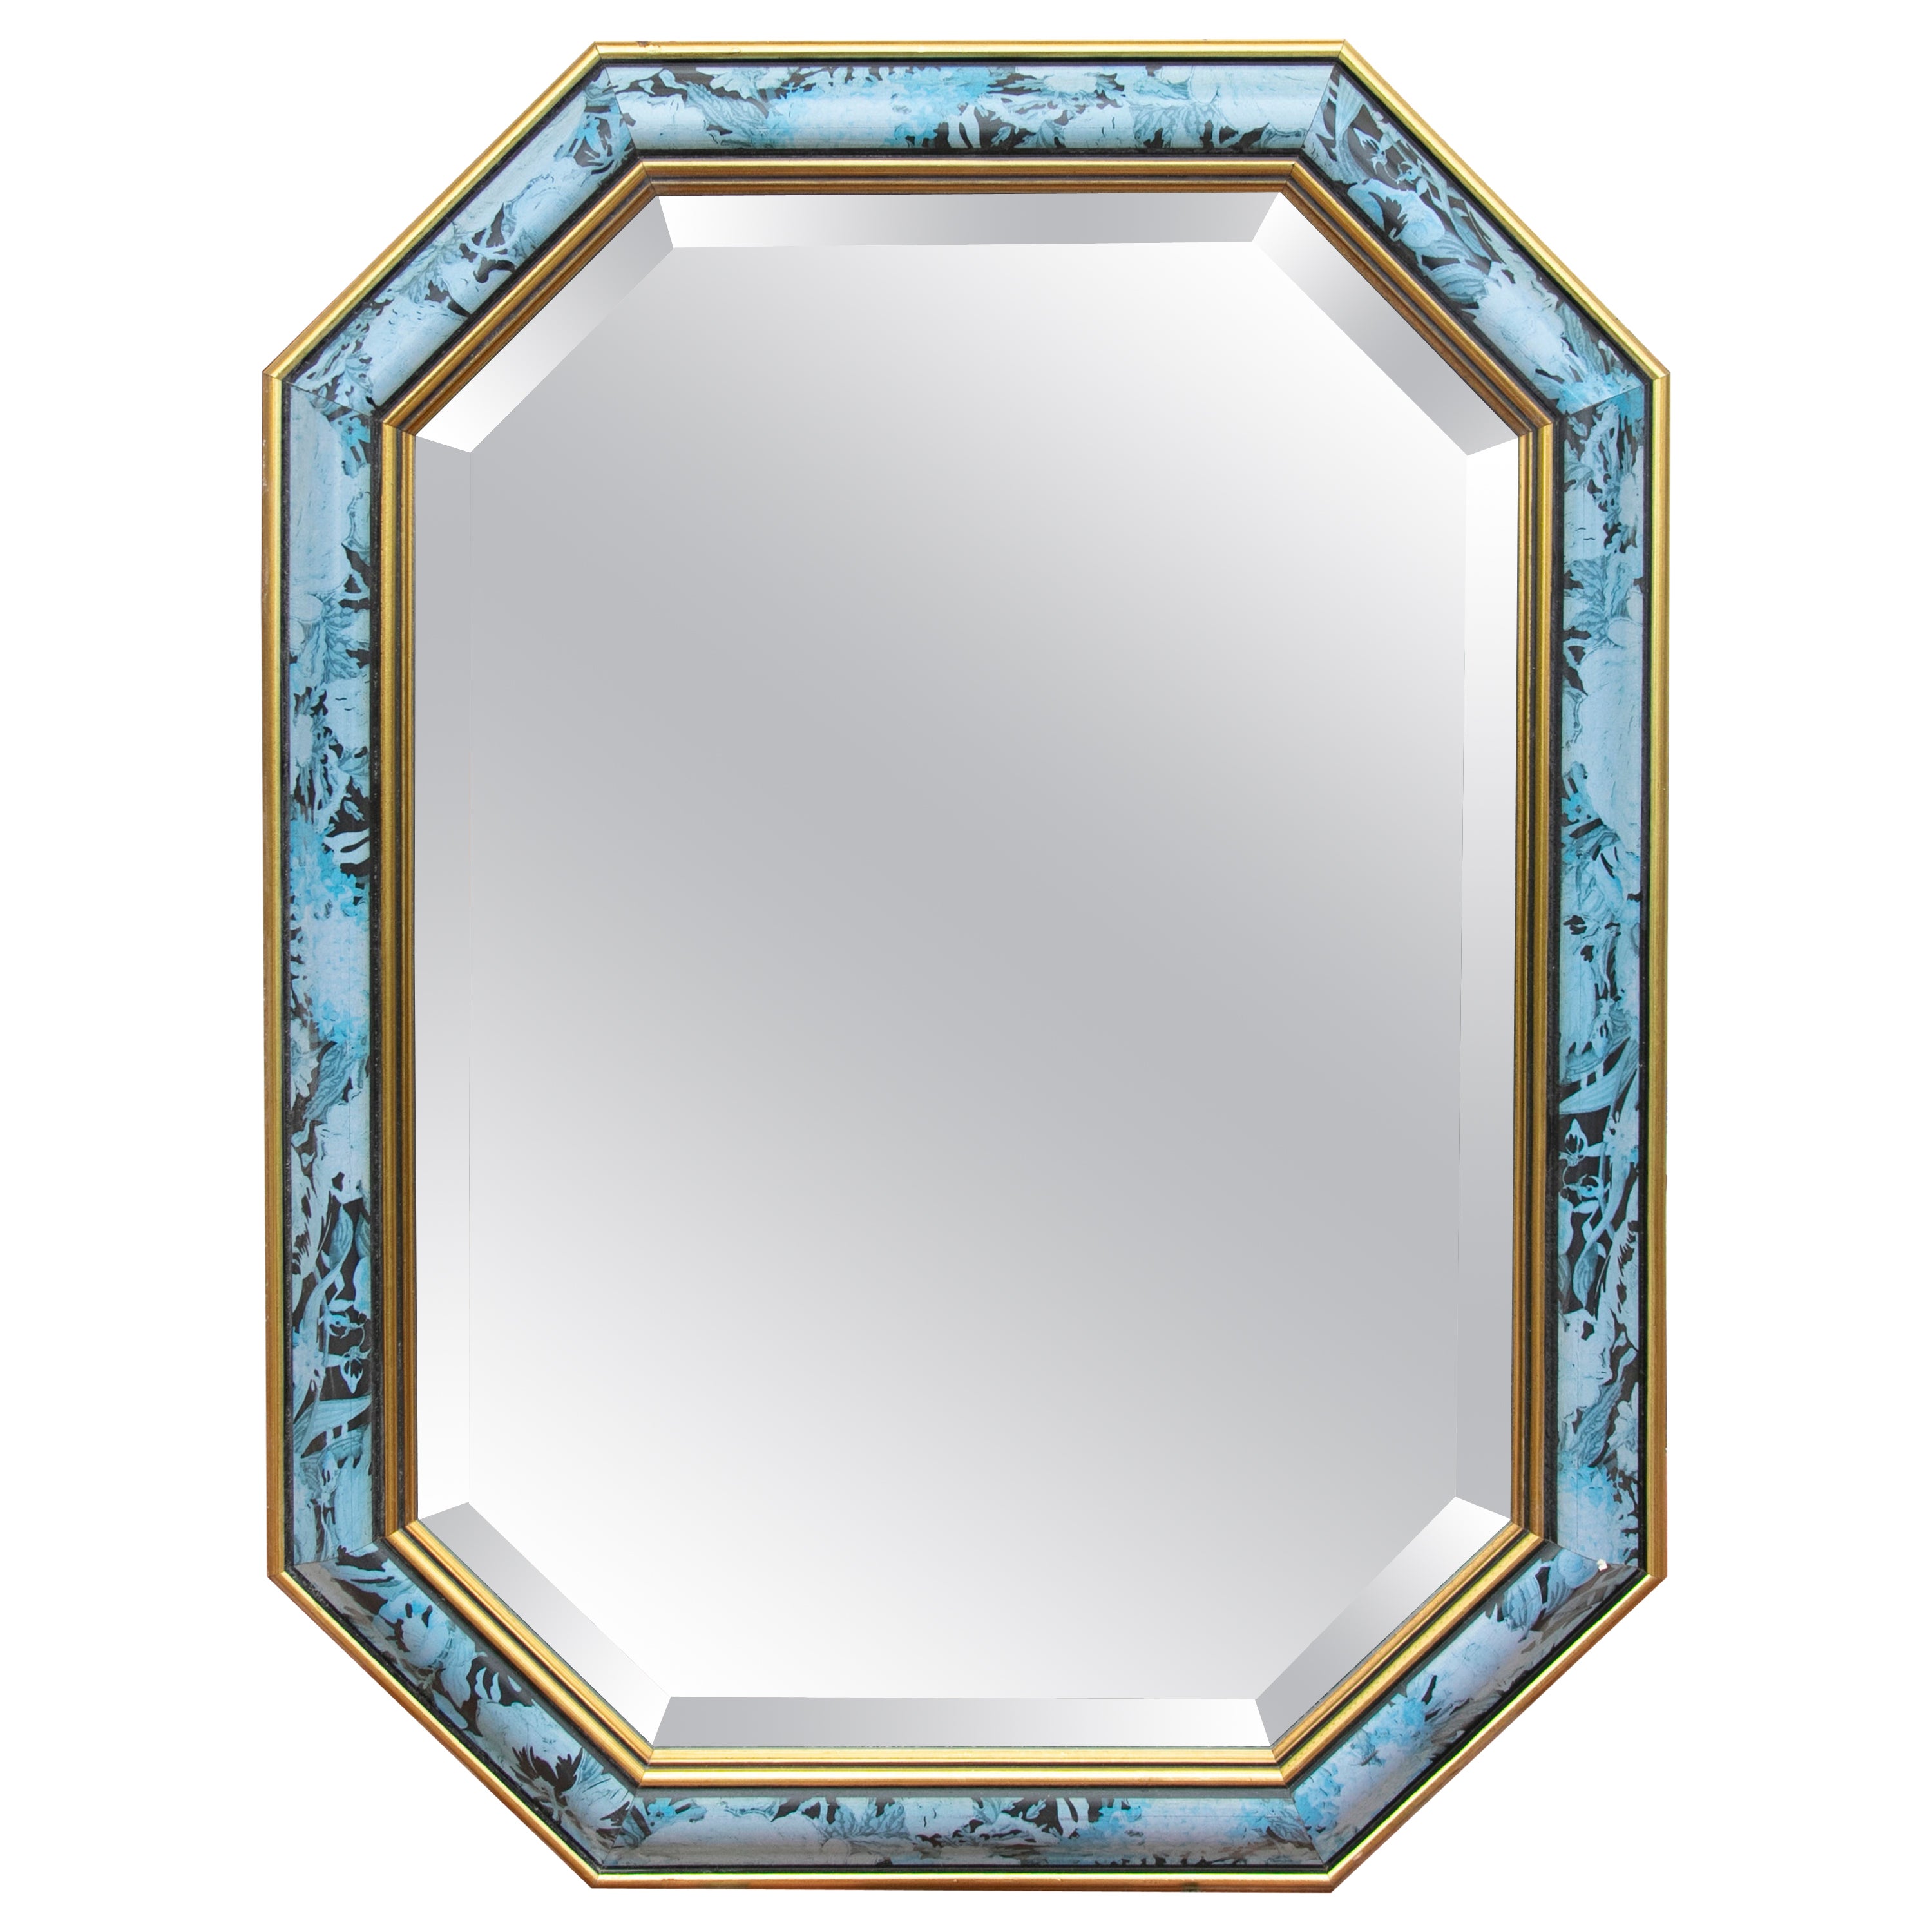 1980s Wooden Wall Mirror with Flower Decoration in Blue Tones For Sale